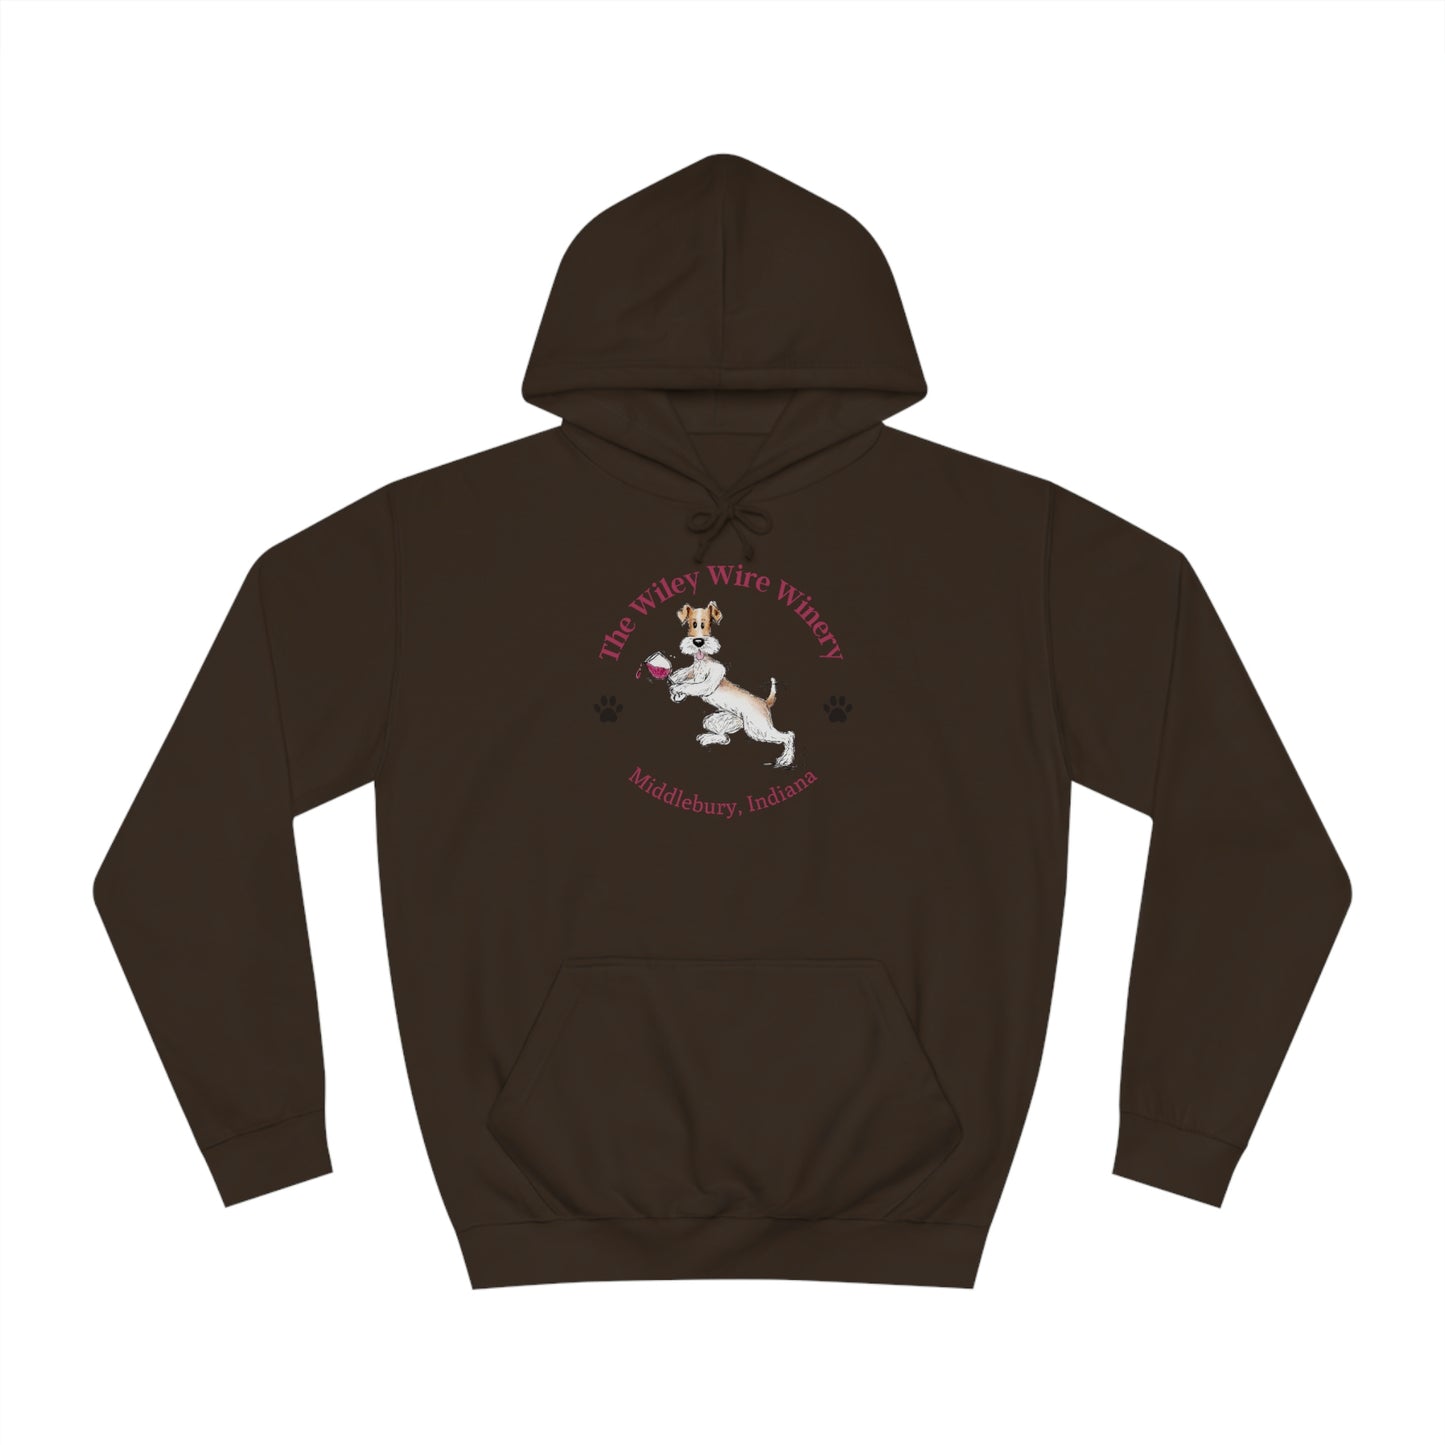 Wiley Wire Winery Hoodie